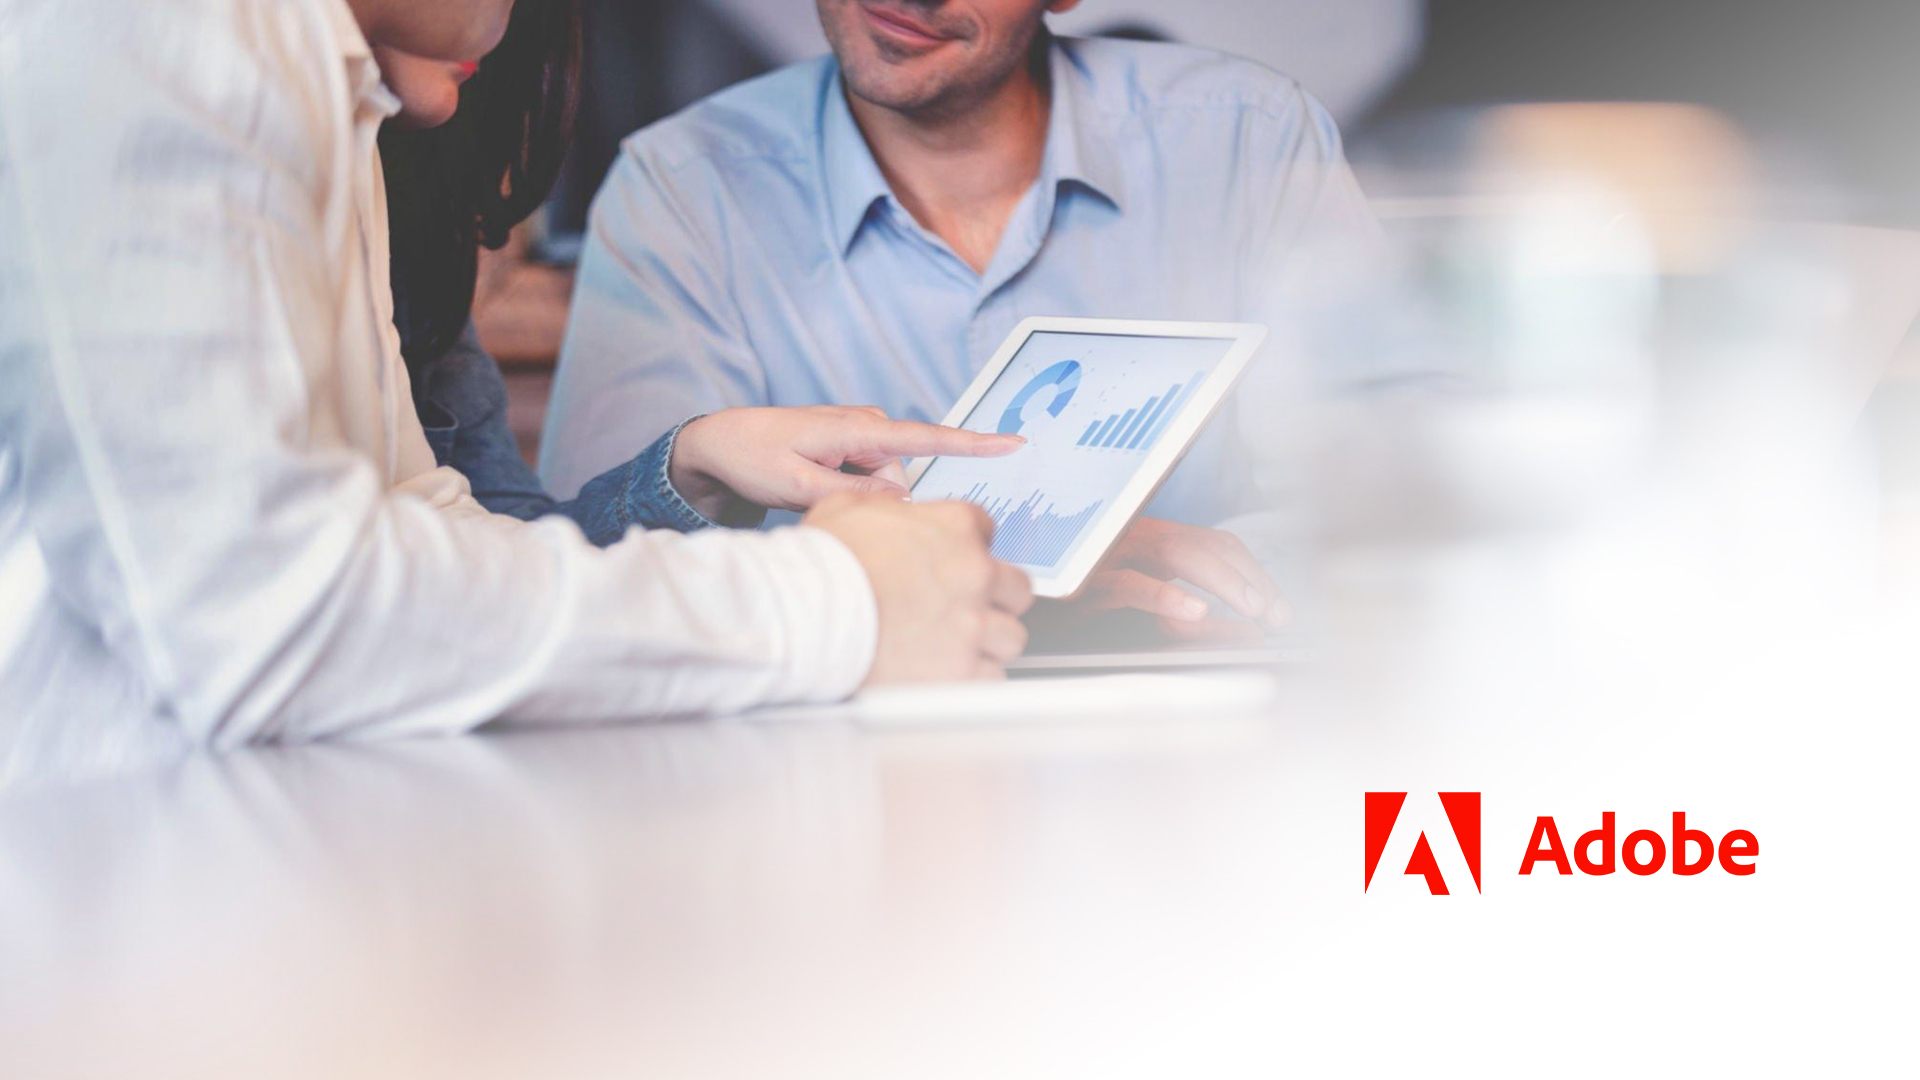 Leading APAC brands are investing in content creation and workflow improvements to succeed in 2023: Adobe Digital Trends Report